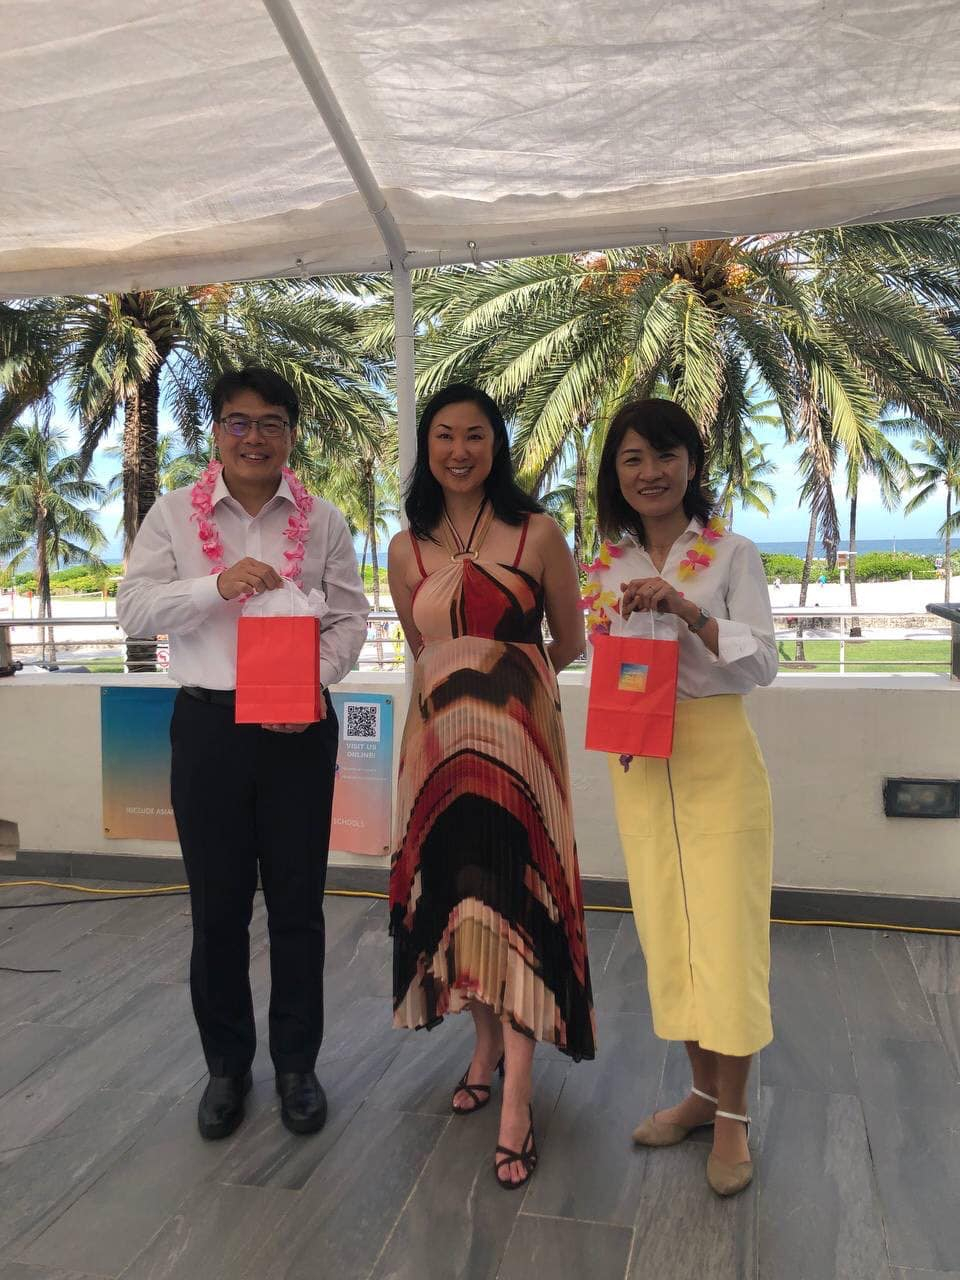 Summer in Japan is a - Consulate General of Japan in Miami